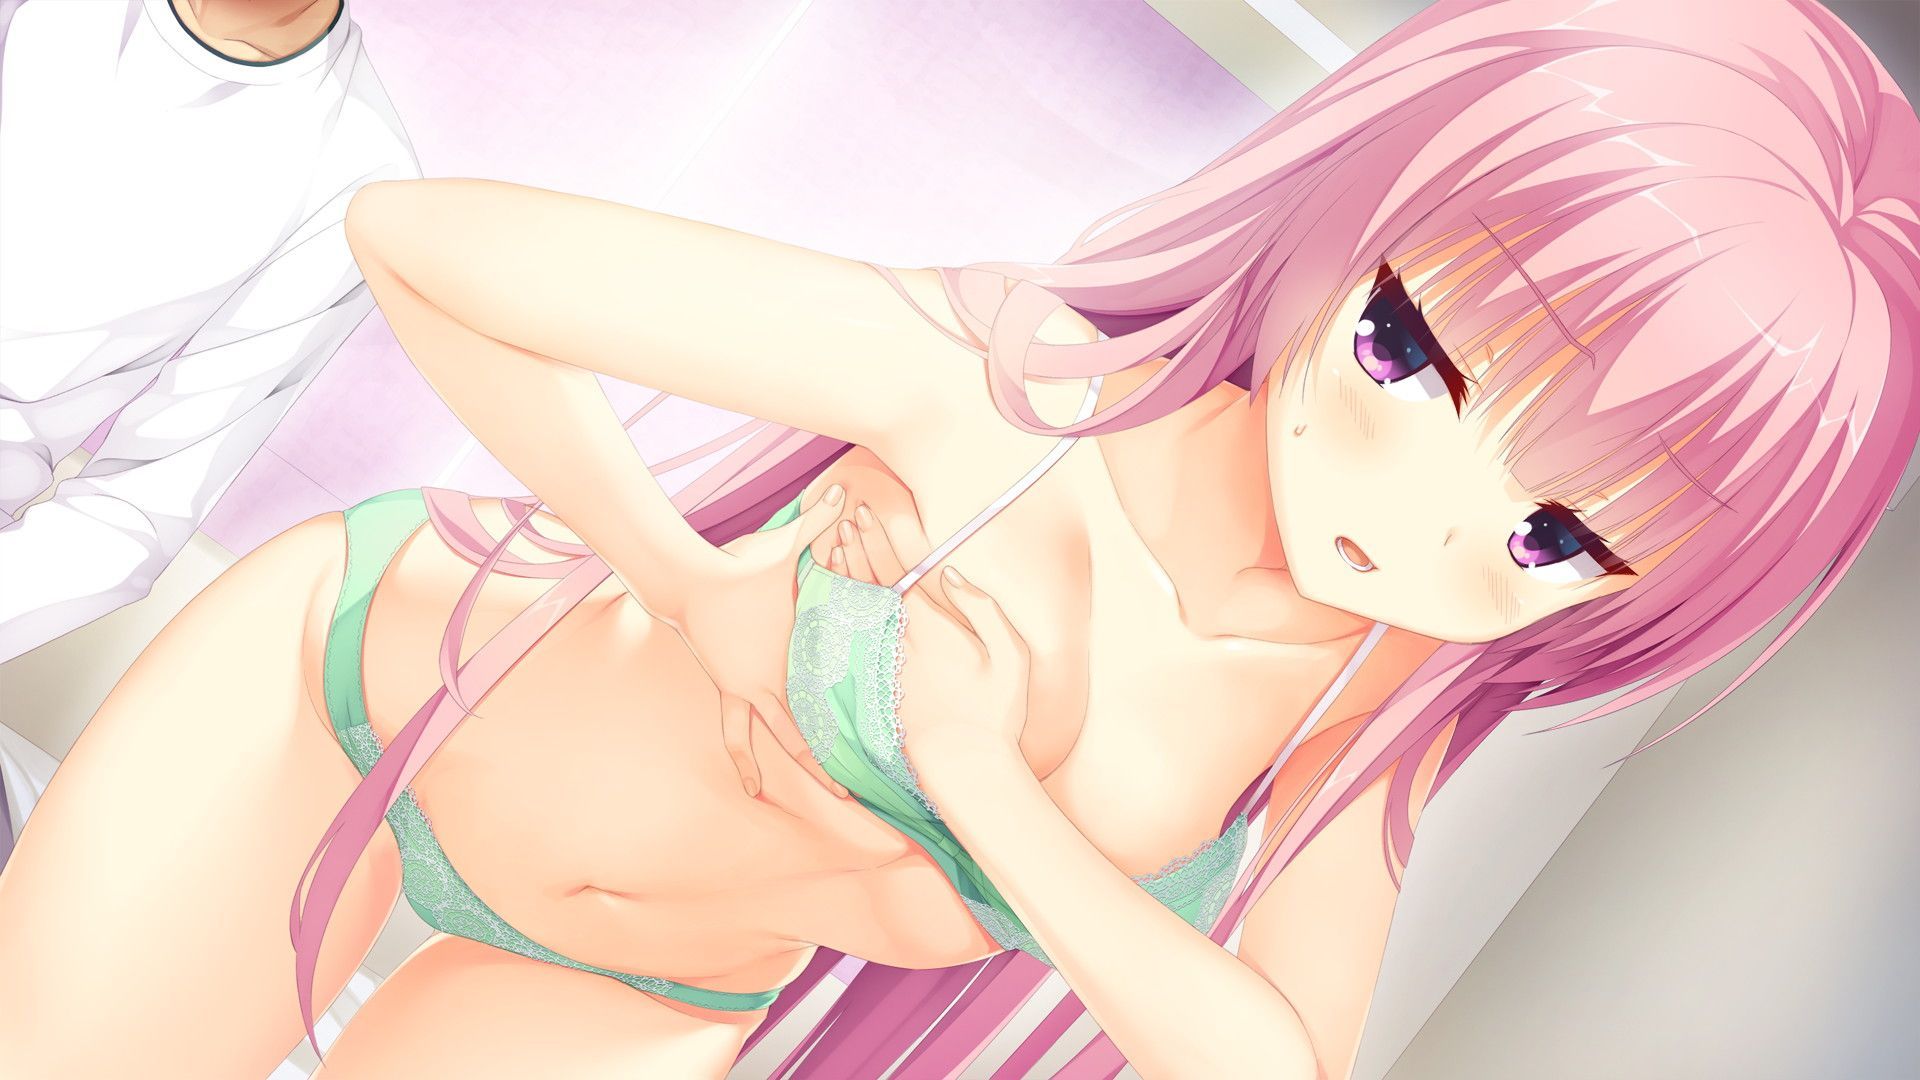 I get an obscene image with a nasty pink hair! 5